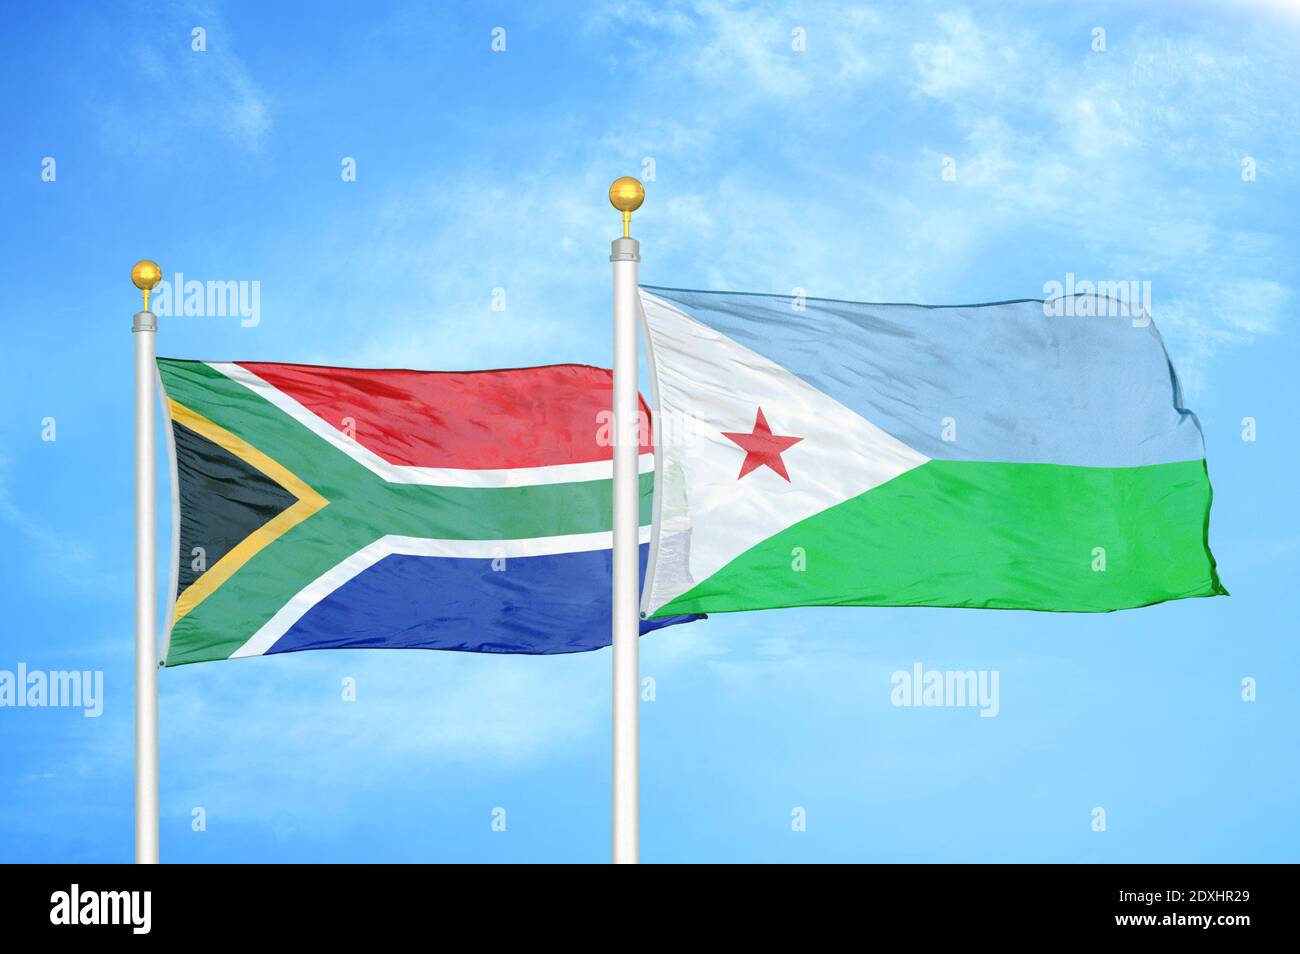 South Africa and Djibouti two flags on flagpoles and blue sky Stock Photo